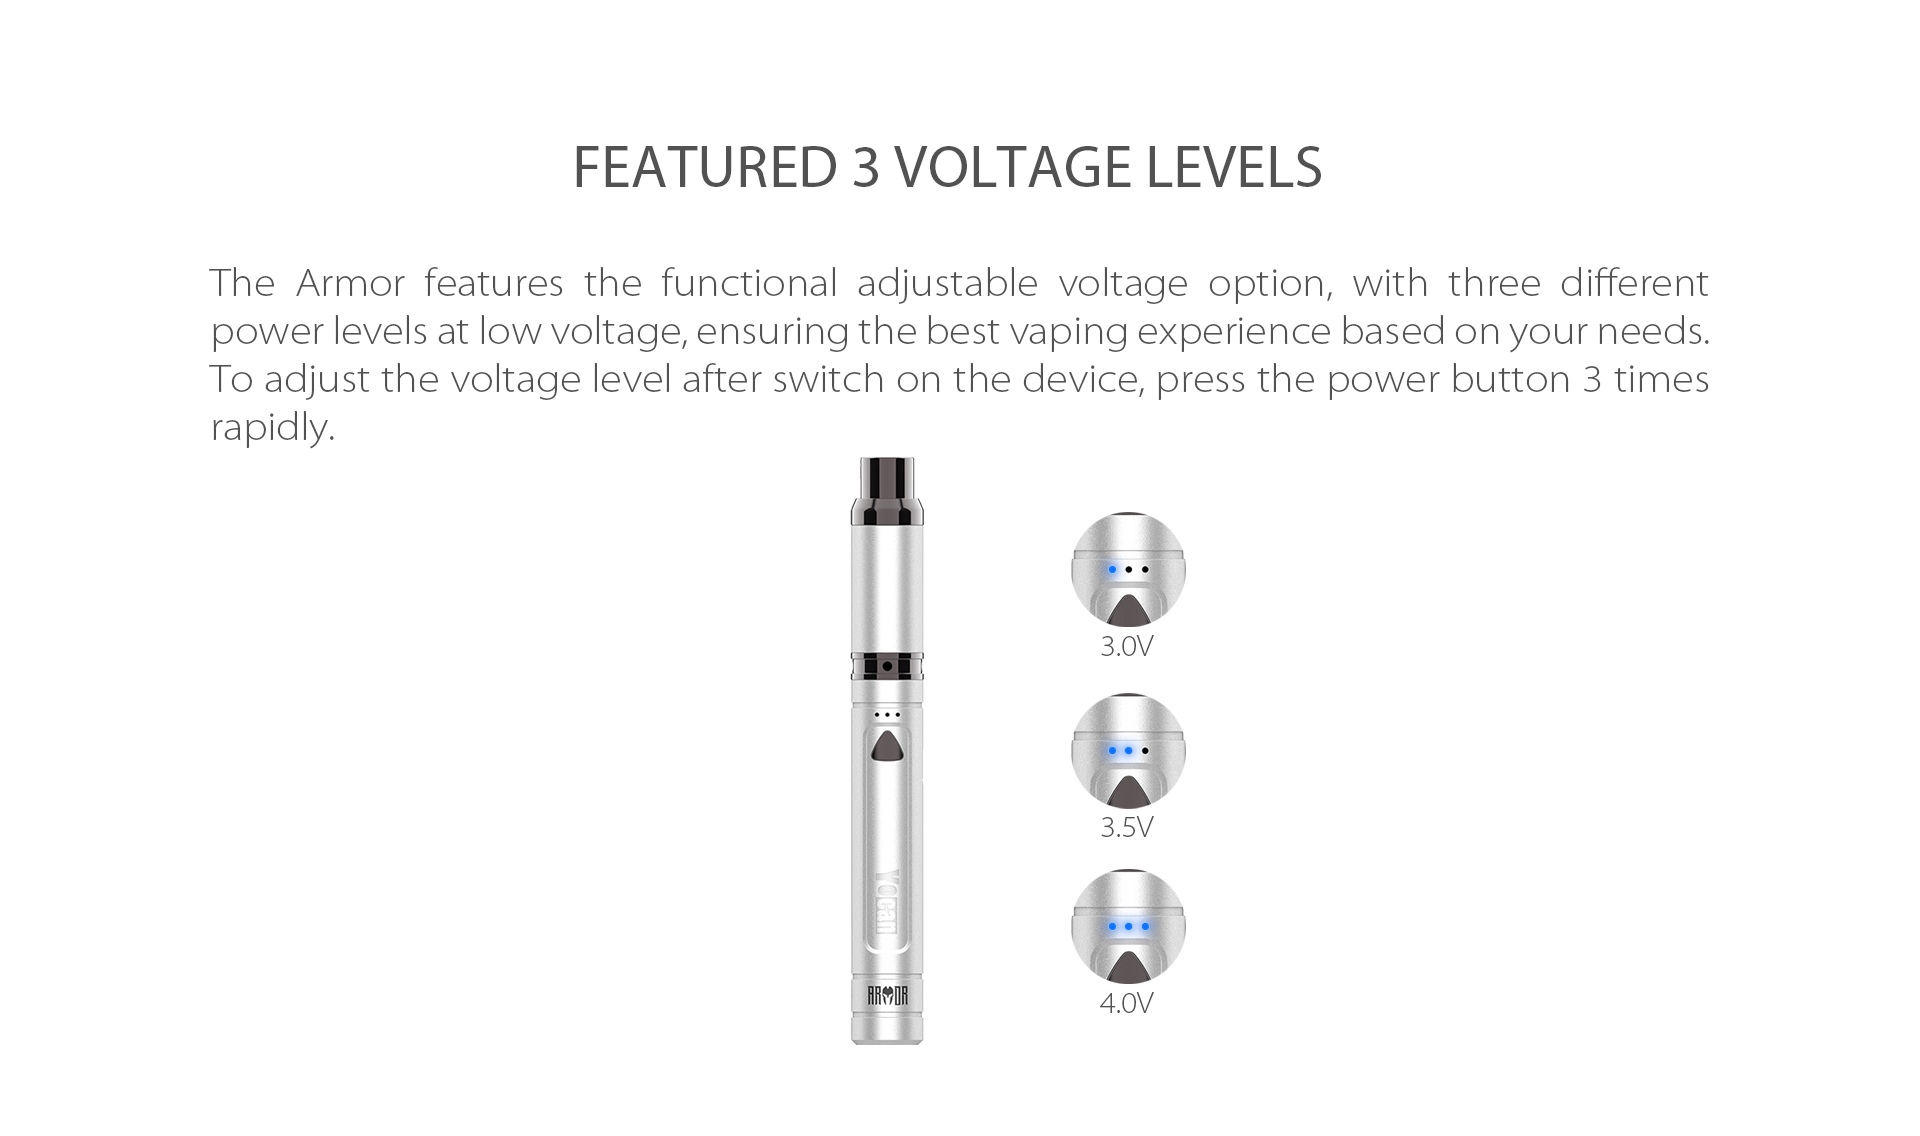 Yocan Armor Vaporizer pen features the functional adjustable voltage option